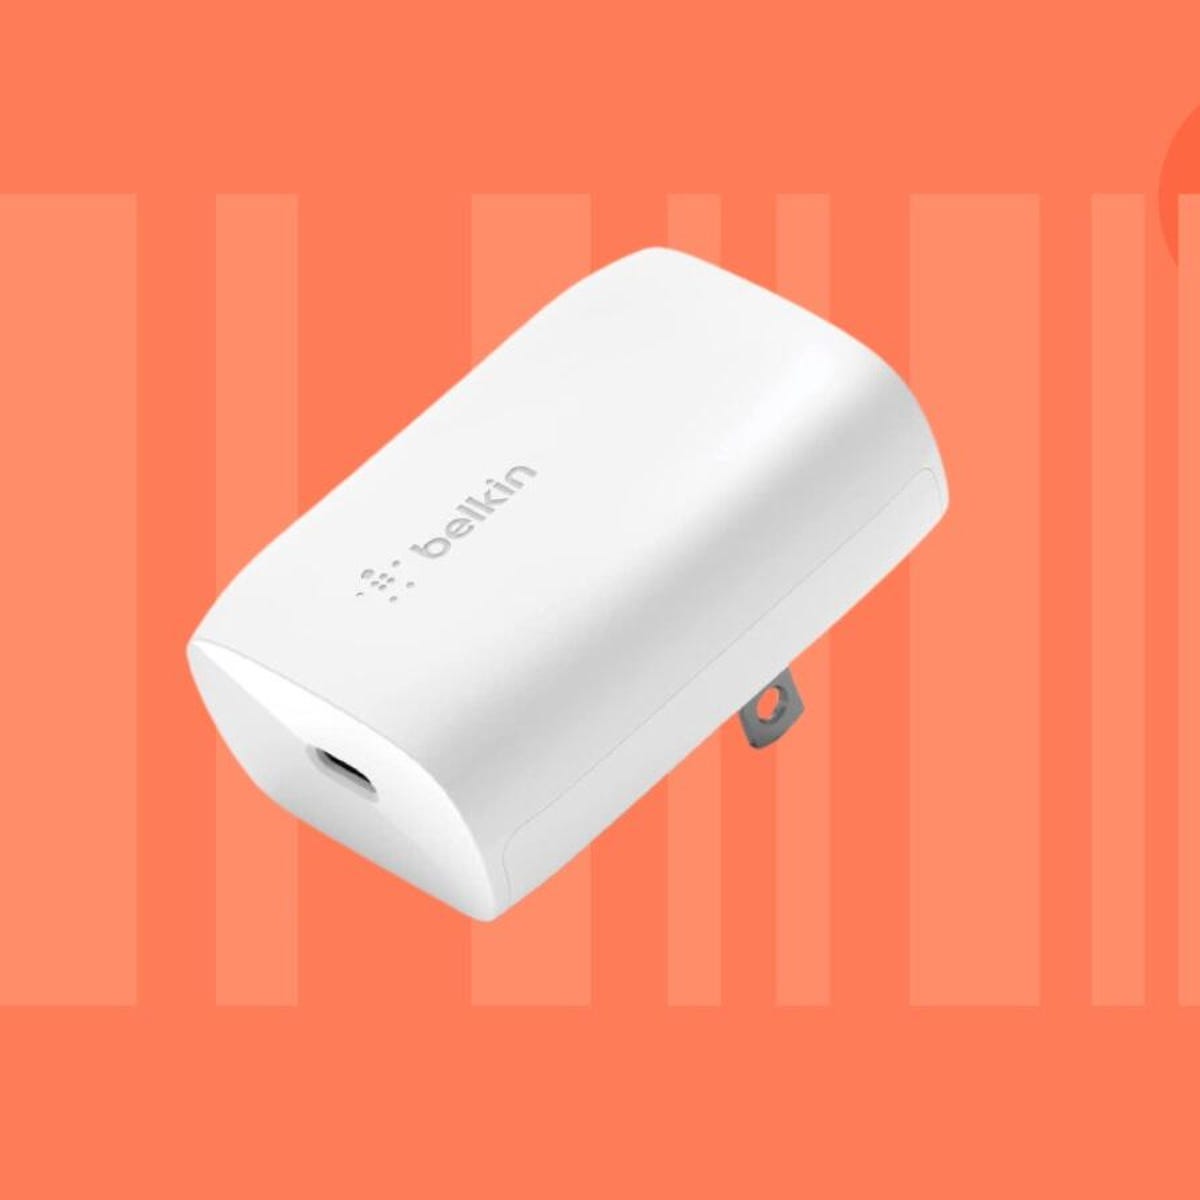 Fast Charge Your Phone for Less With This $14 Belkin USB-C Charger - CNET